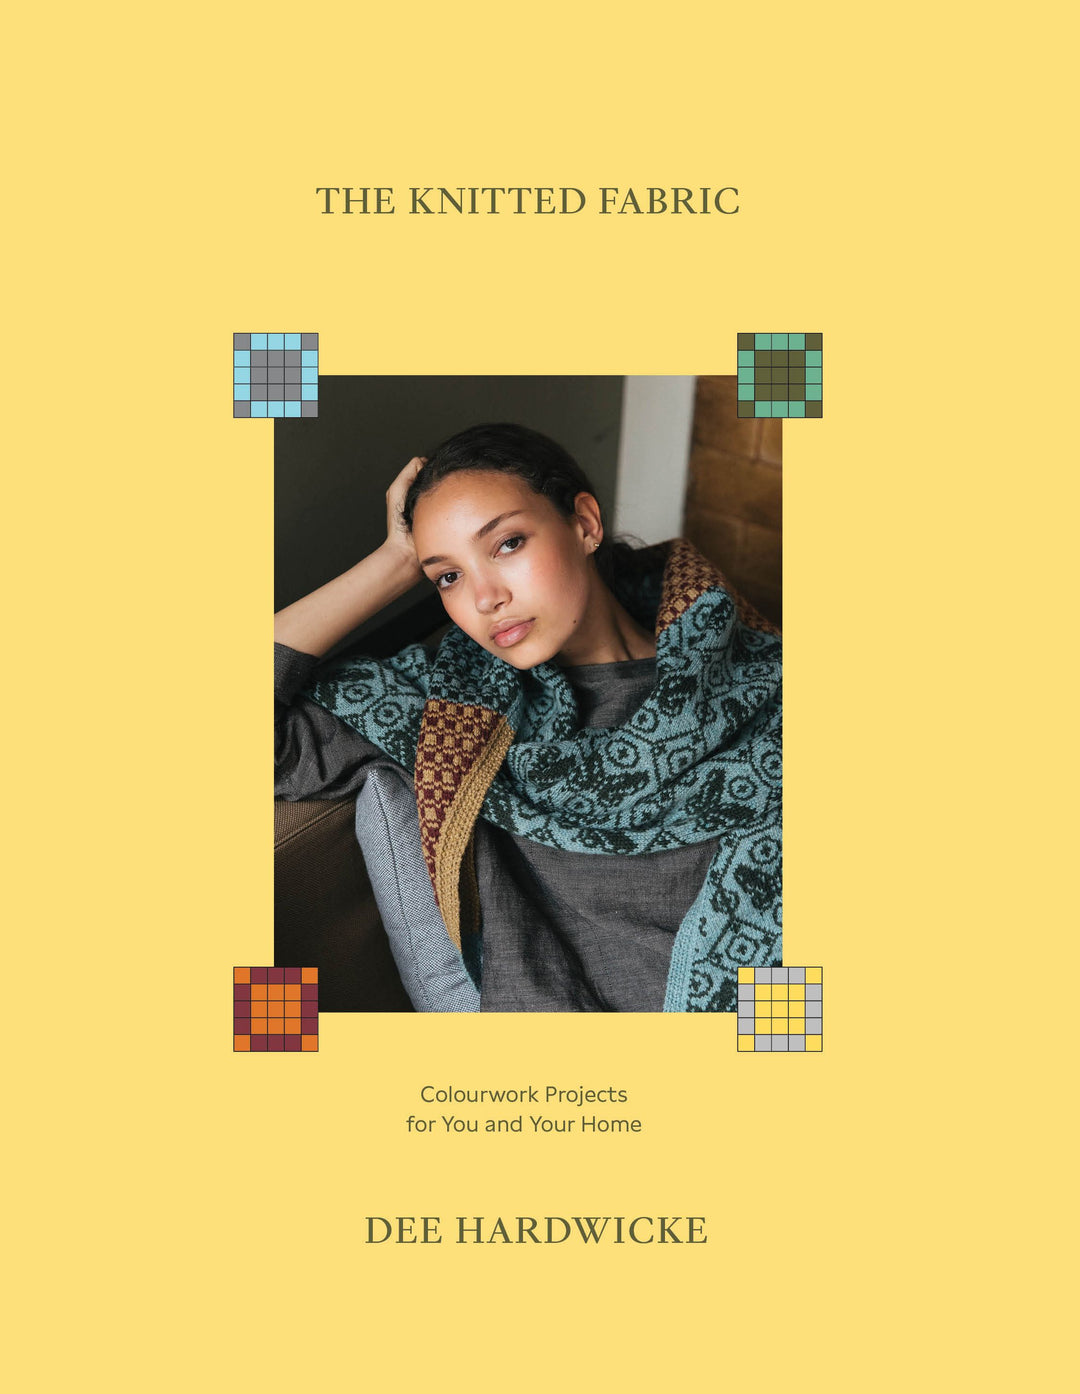 The Knitted Fabric--Colorwork Projects for You & Your Home by Dee Hardwick